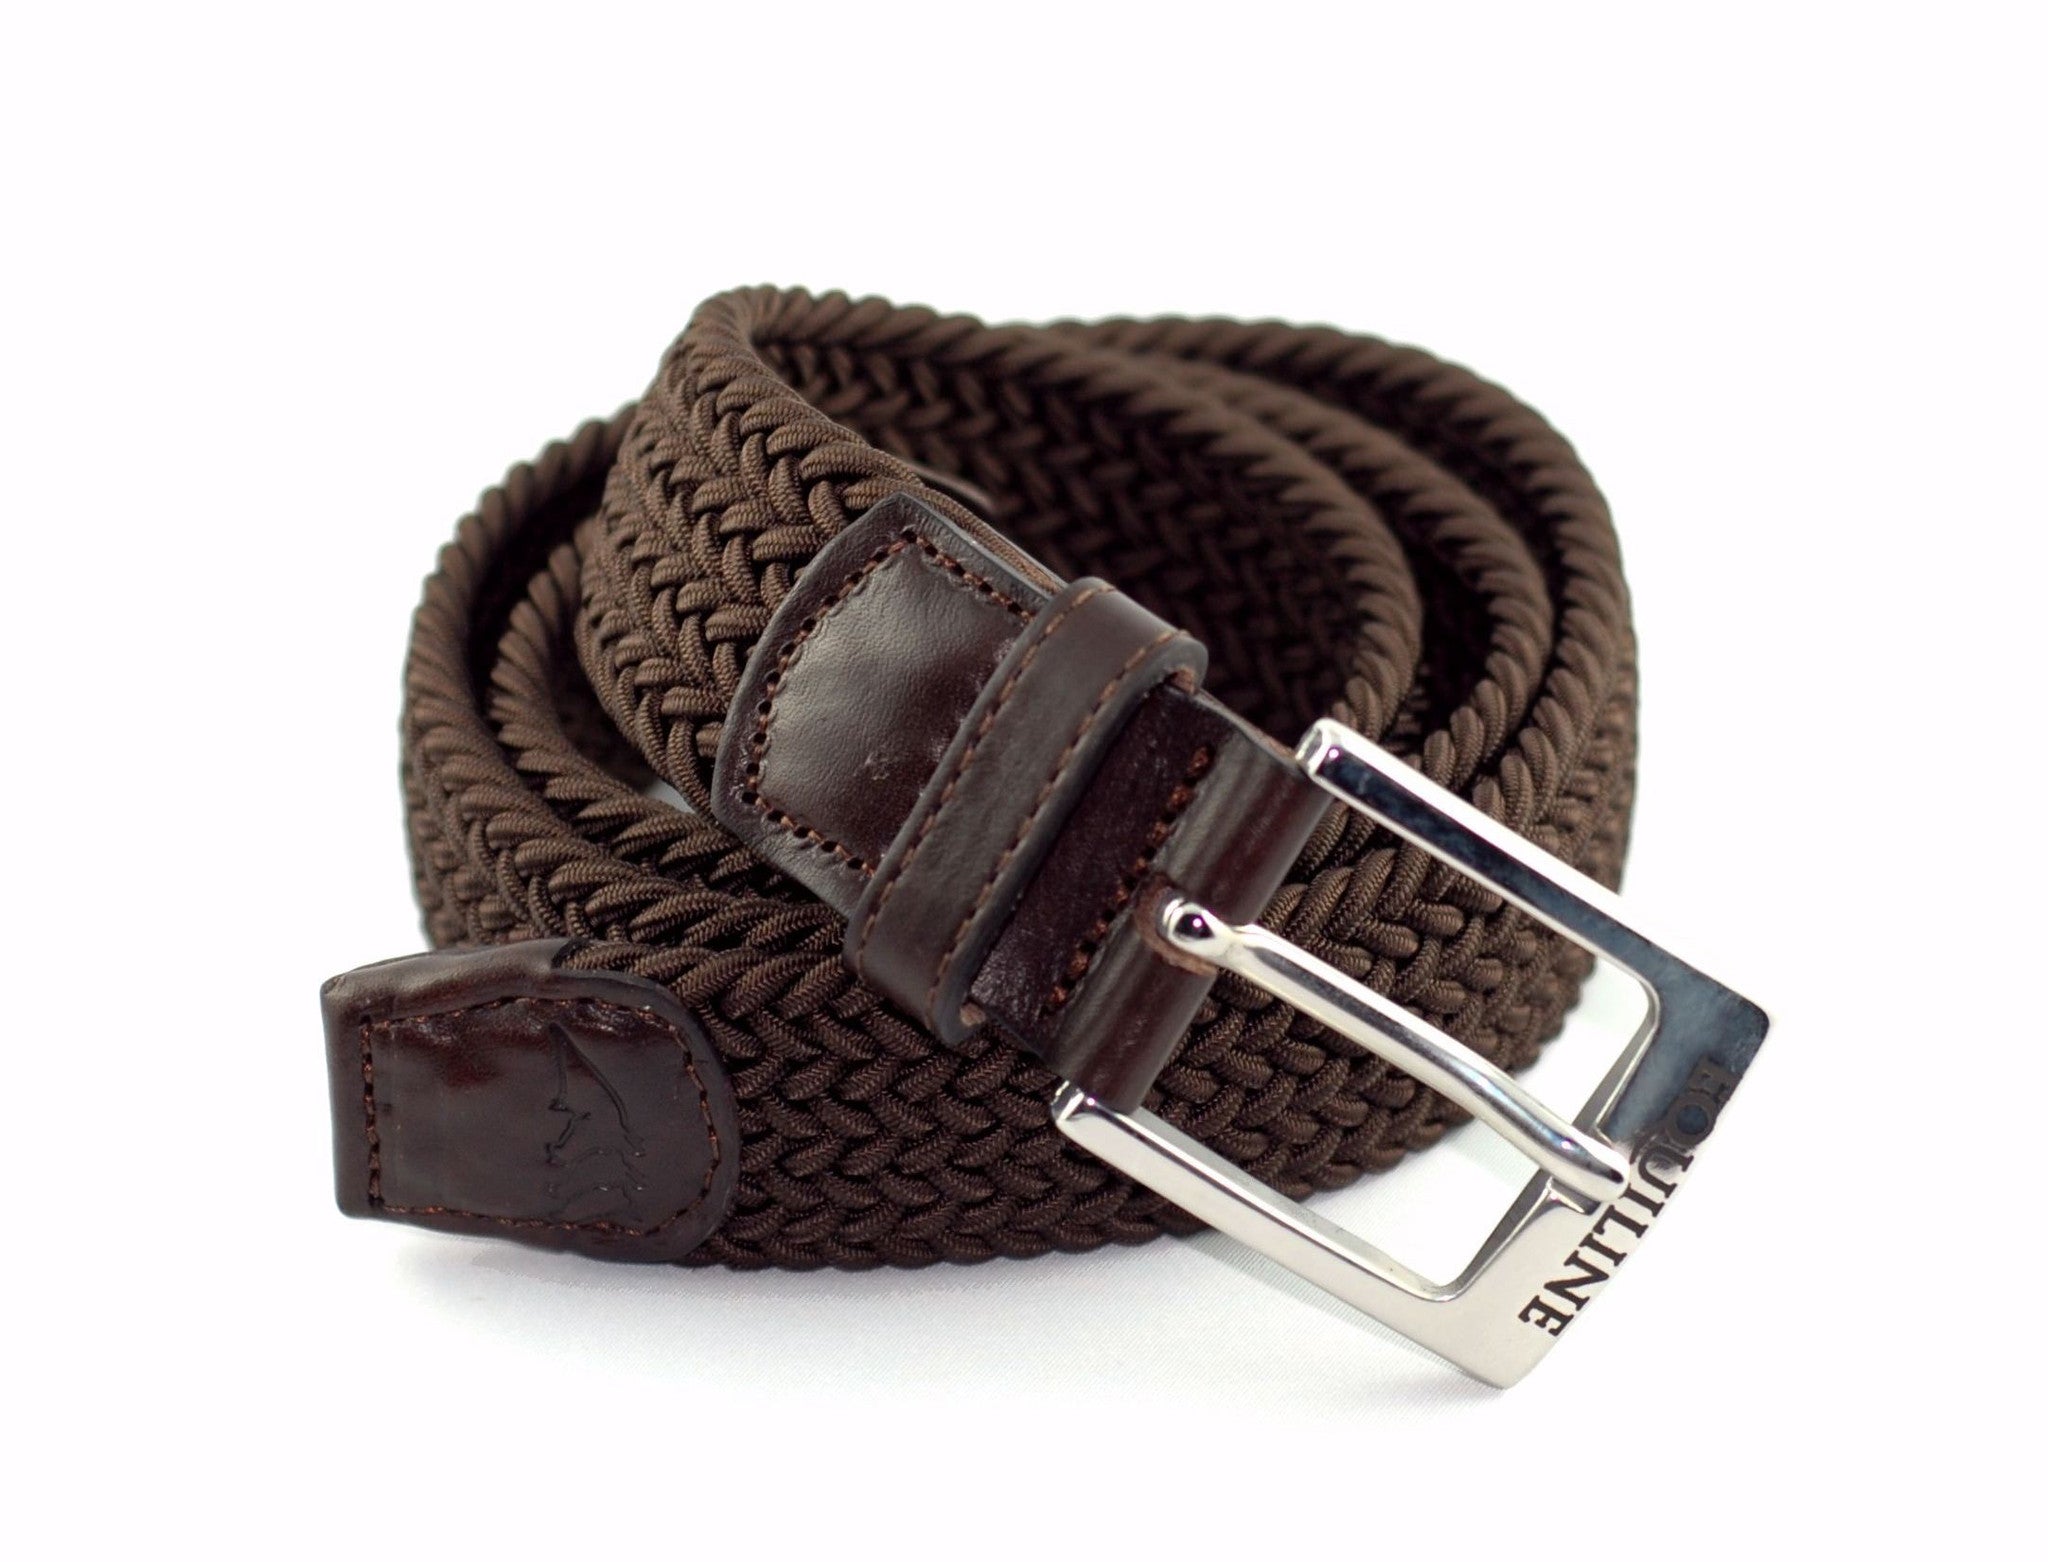 Equiline One Belt - The Tack Shop of Lexington - 1